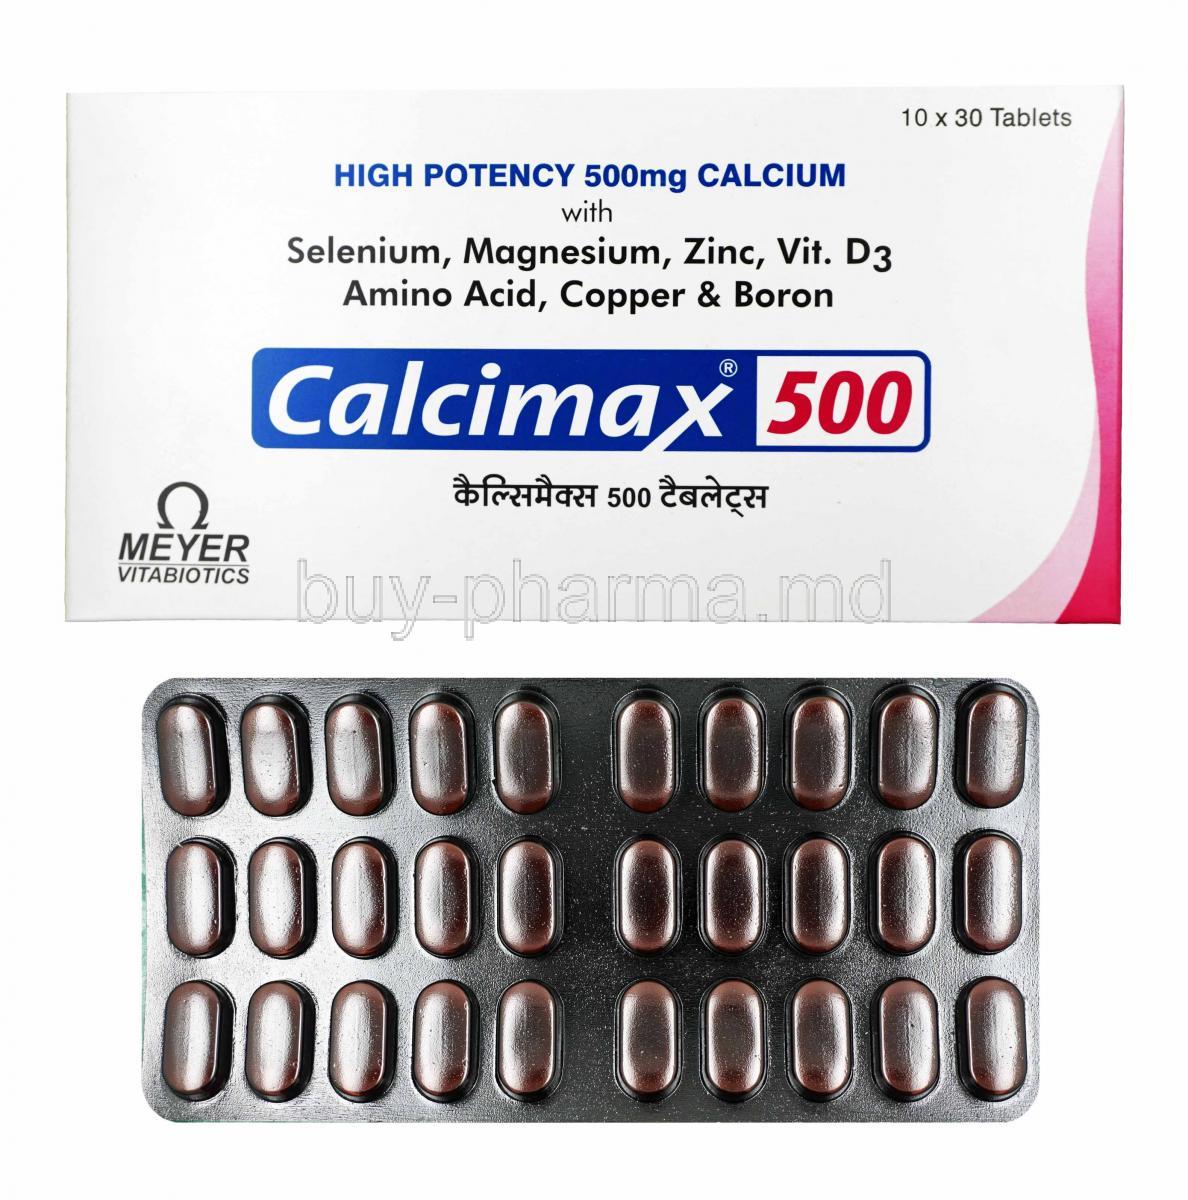 Calcimax 500 box and tablets